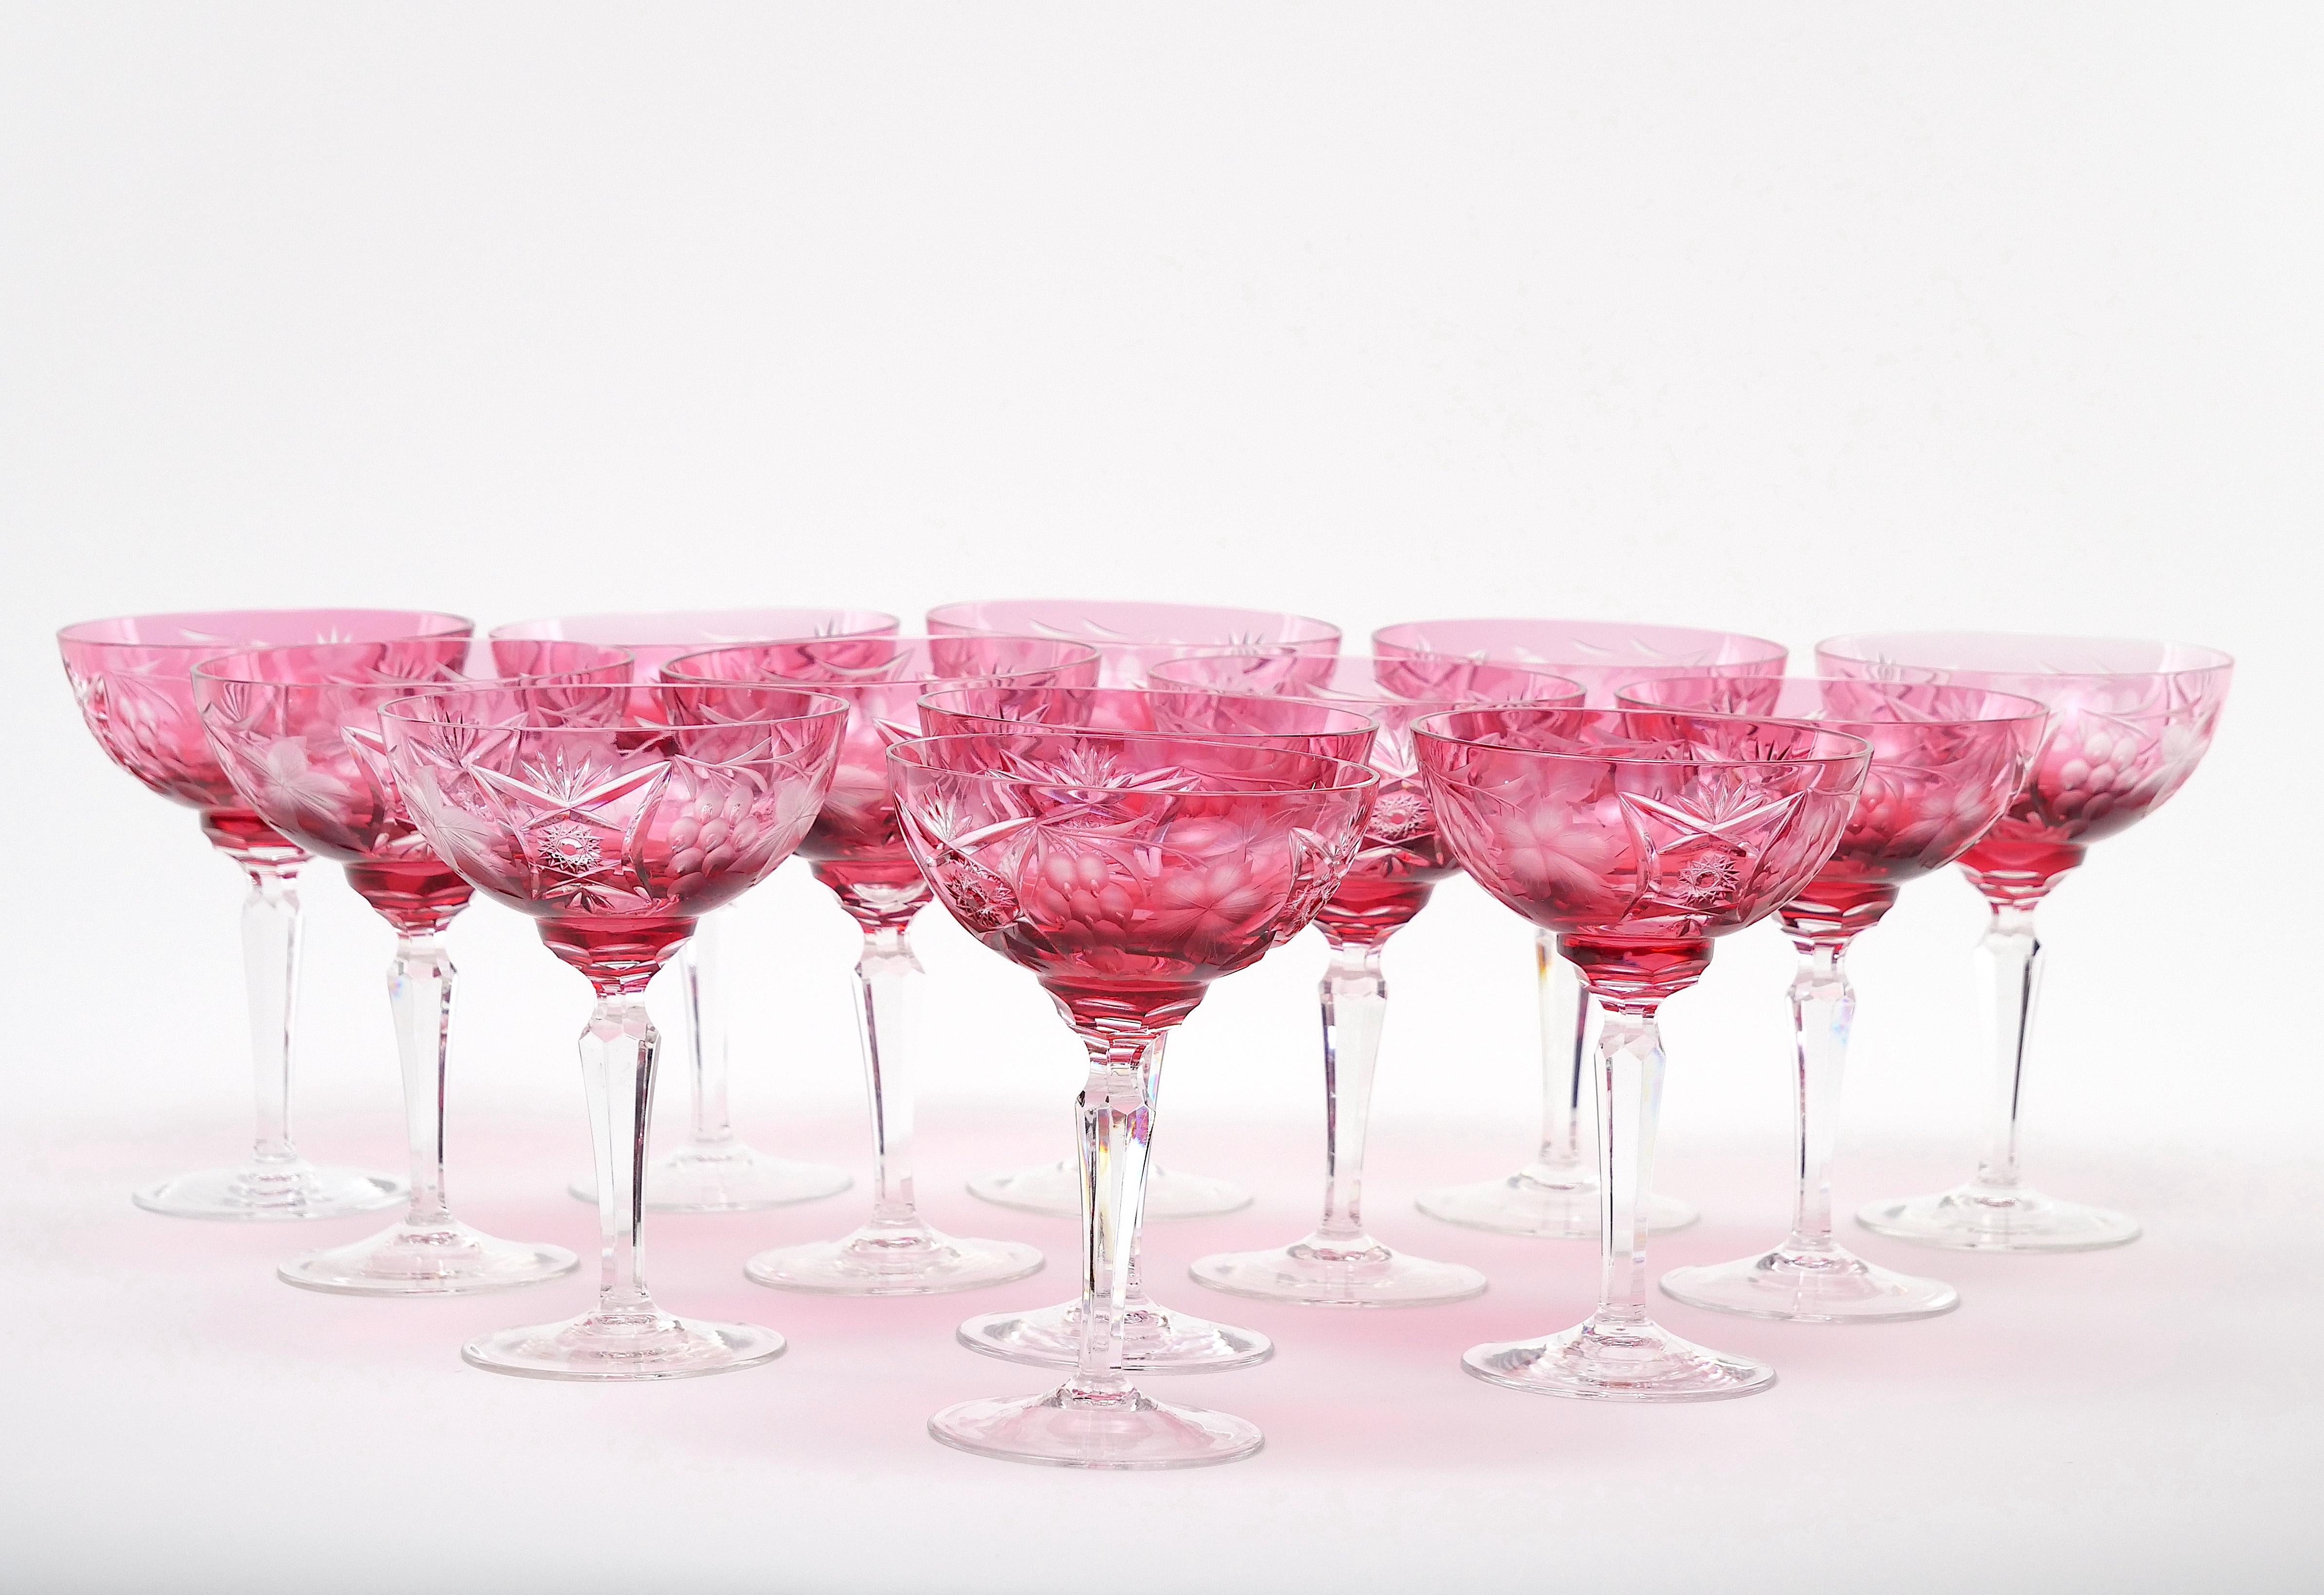 
Enhance your elegant soirees with our exquisite Val-Saint-Lambert hand etched tableware or barware crystal champagne coupe service for 12 people. Crafted with the utmost precision and artistry, each champagne coupe is meticulously etched by skilled